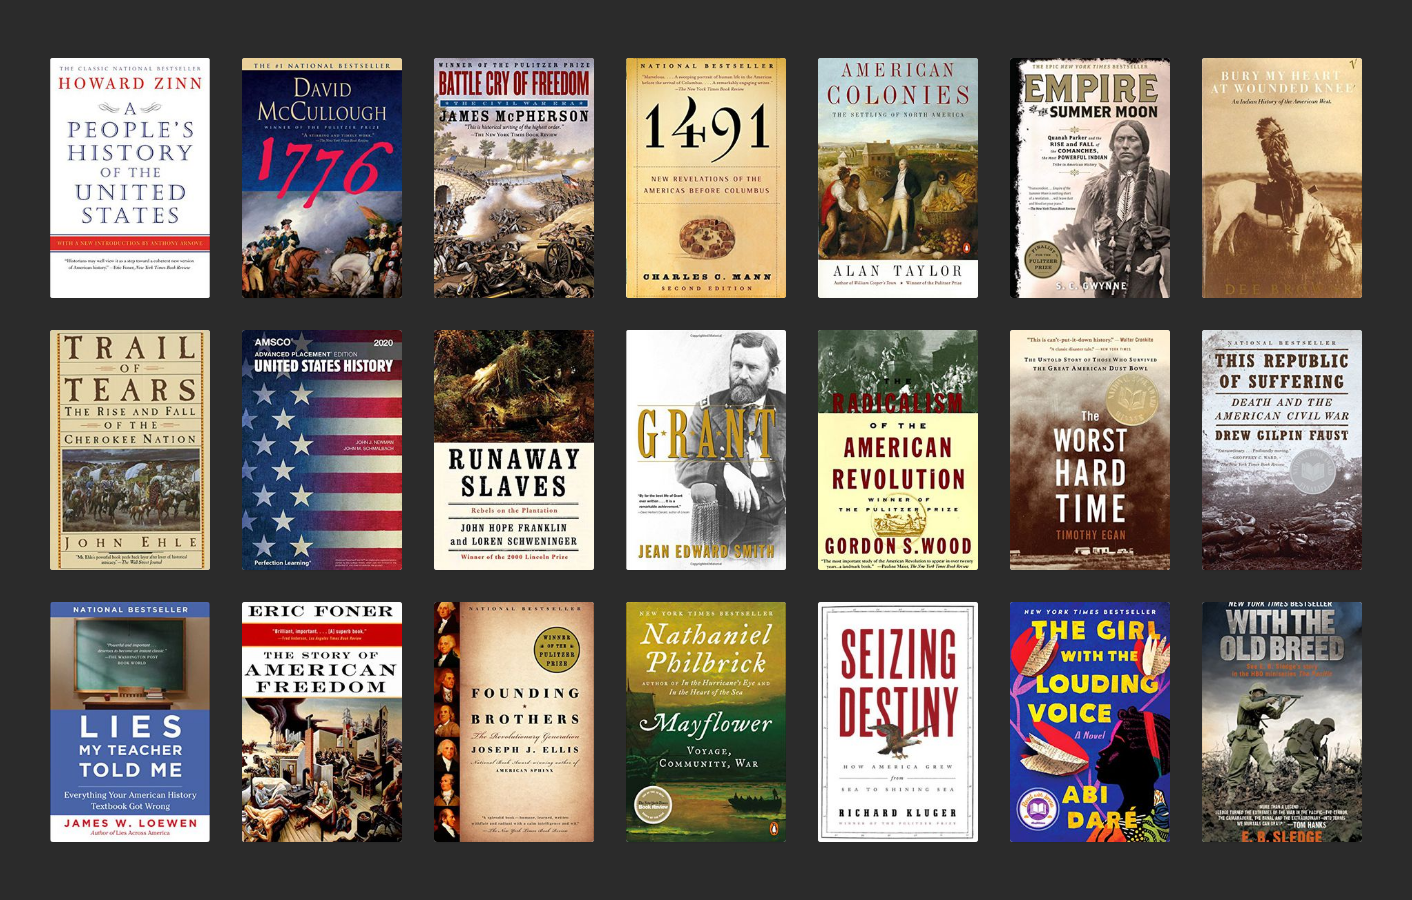 best history books reviews